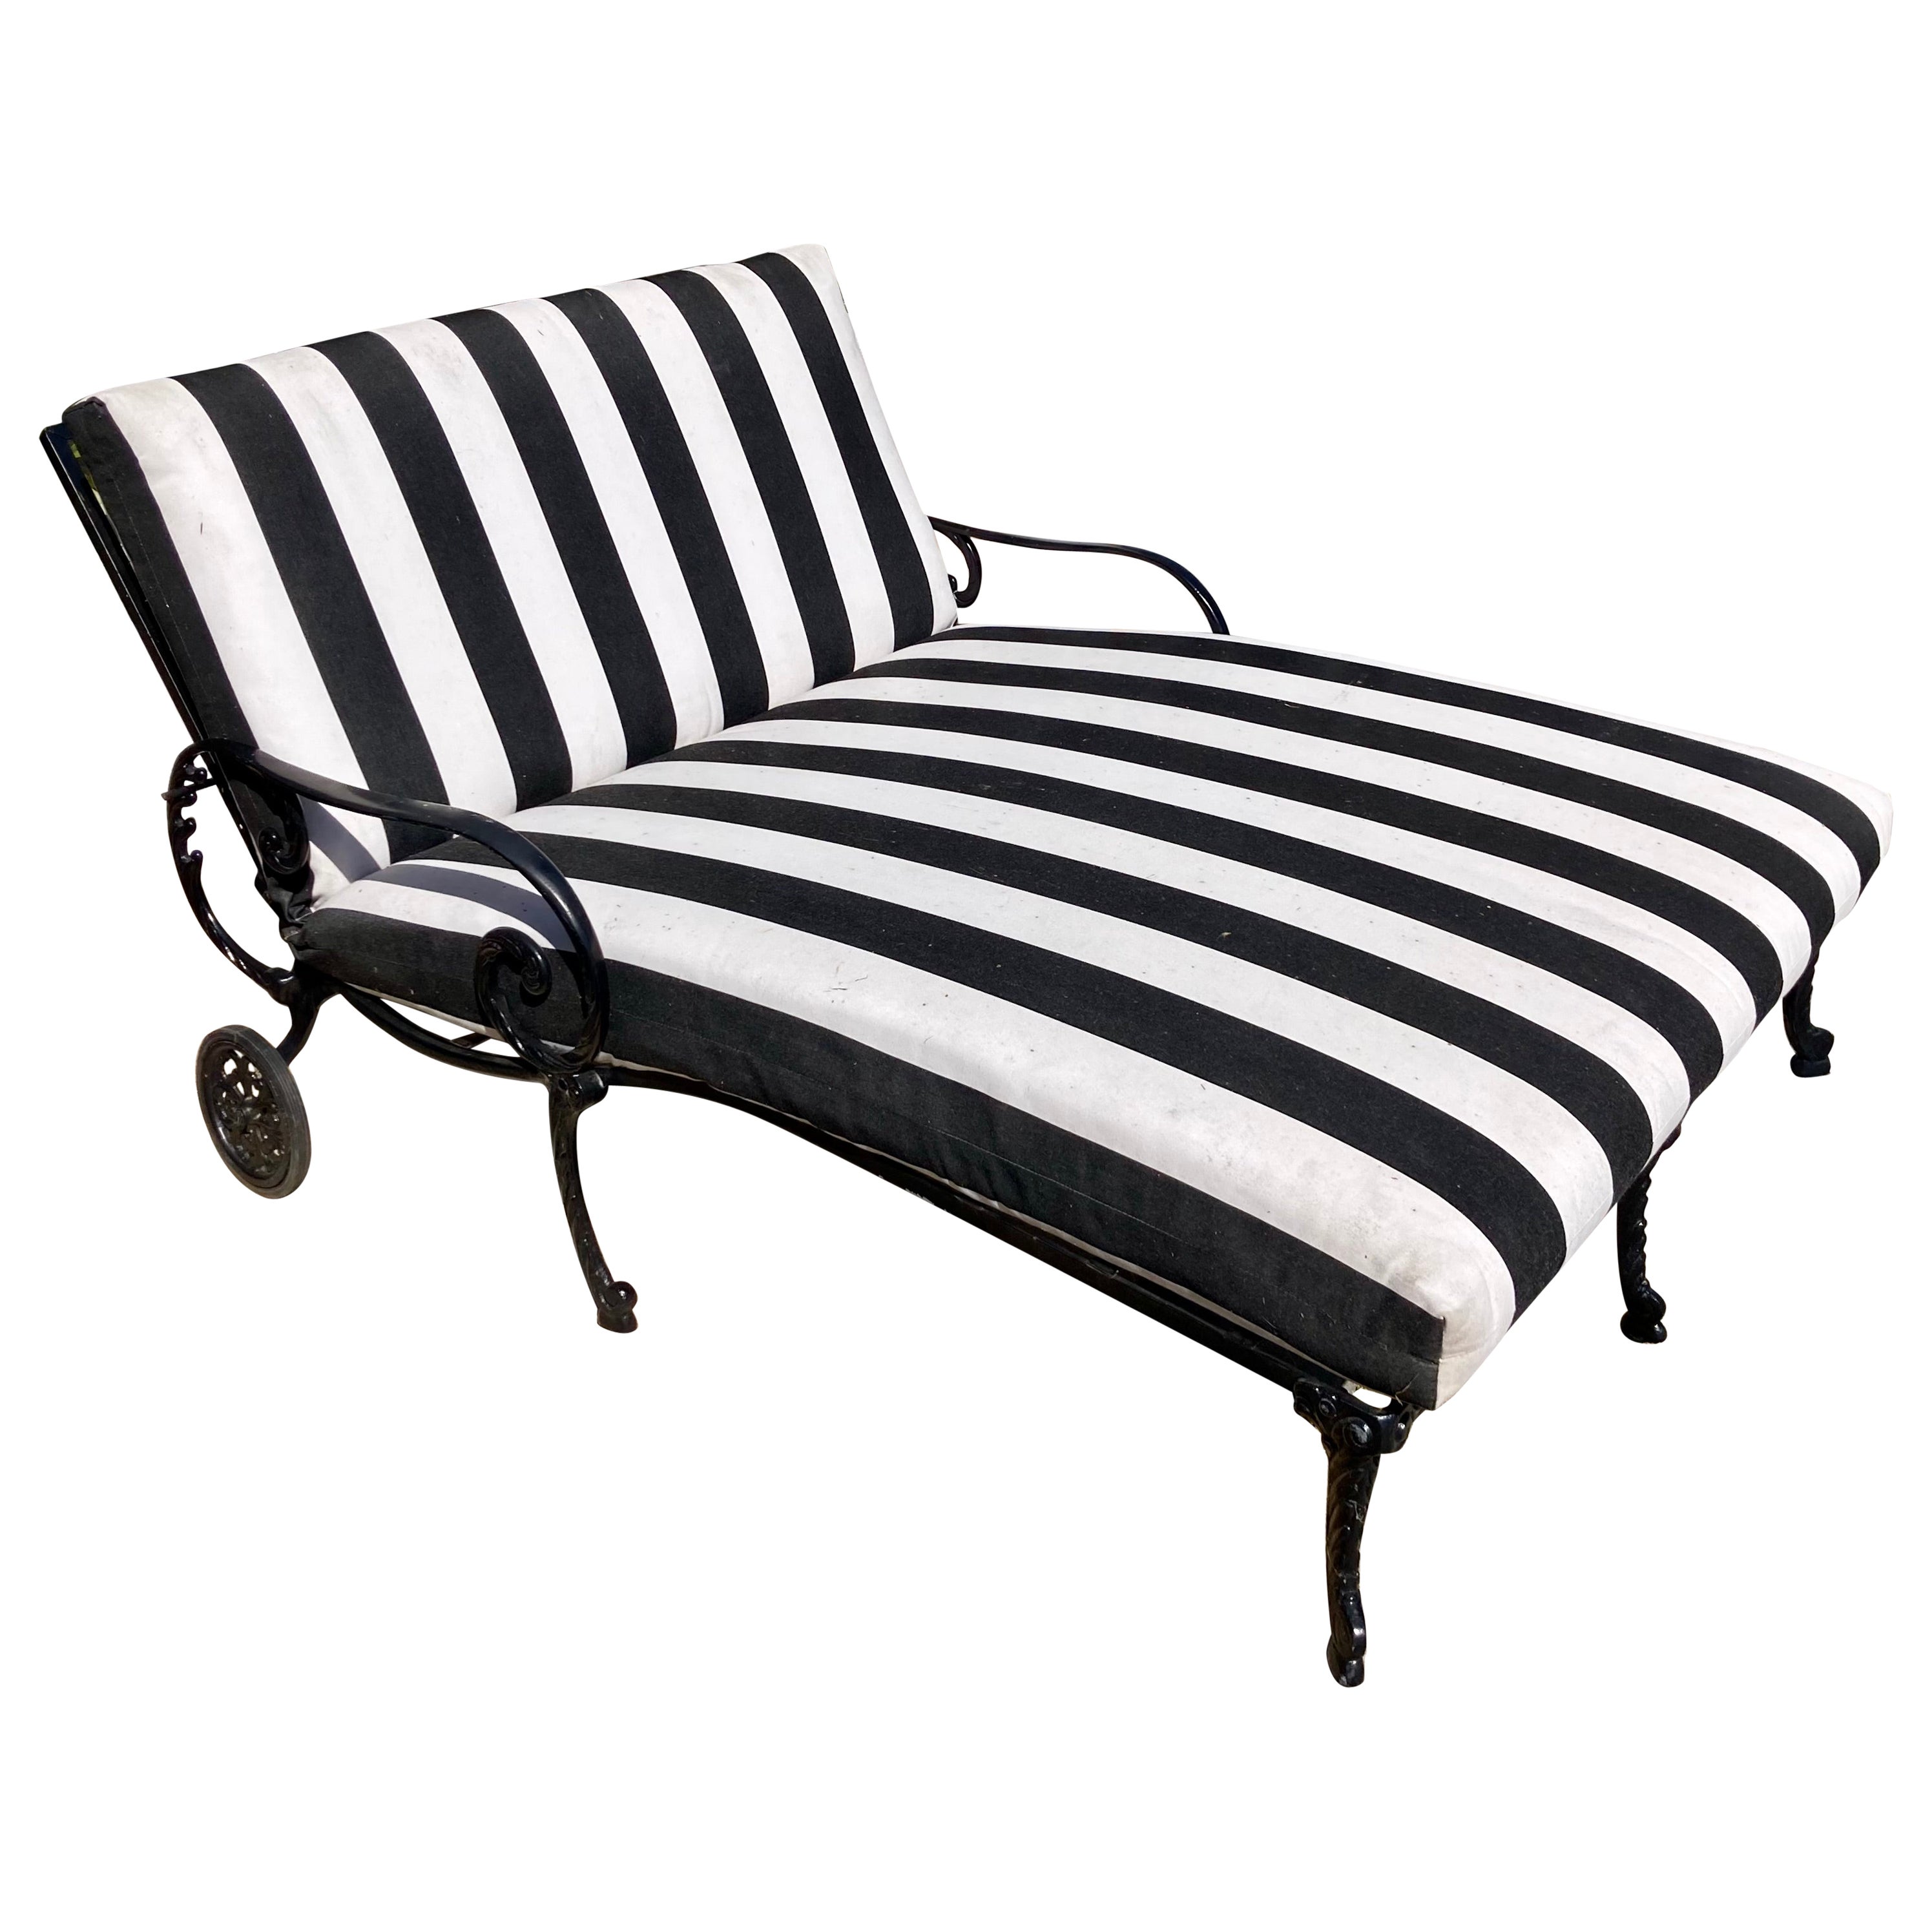 Hollywood Regency Patio 2-Person Double Chaise